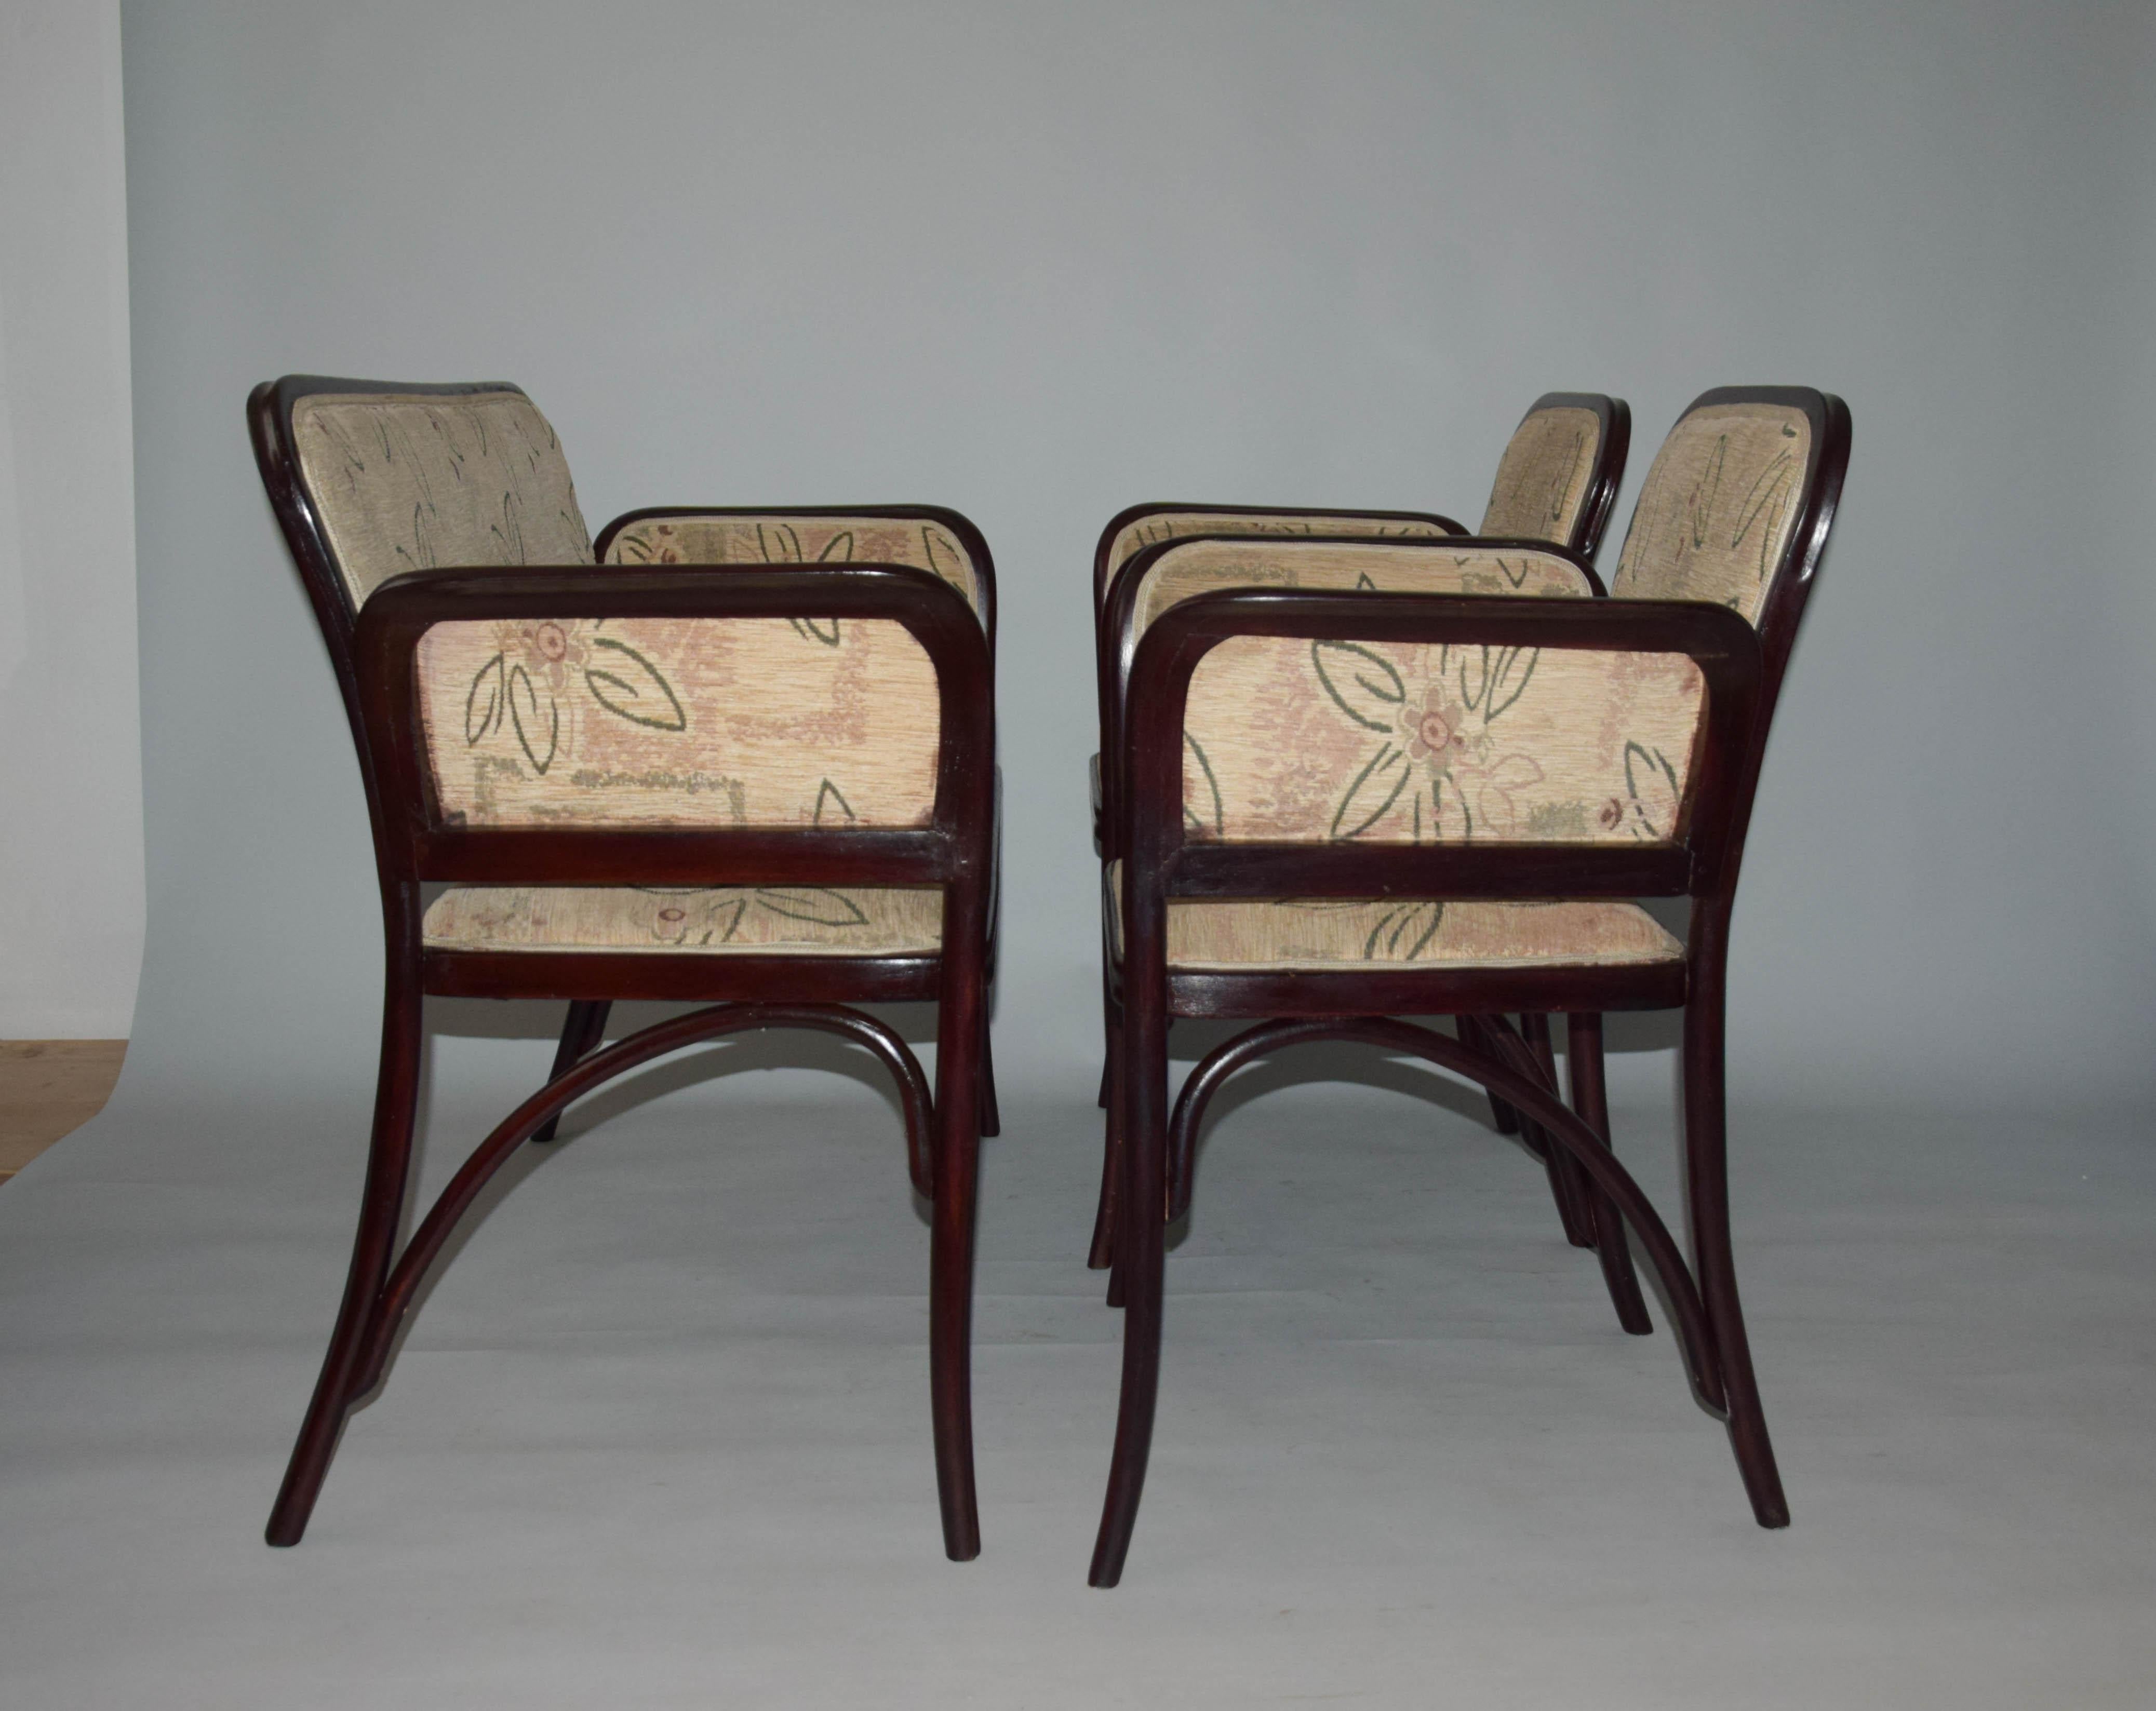 Austrian Art Nouveau Seating Set by Otto Wagner for Thonet, 1910s For Sale